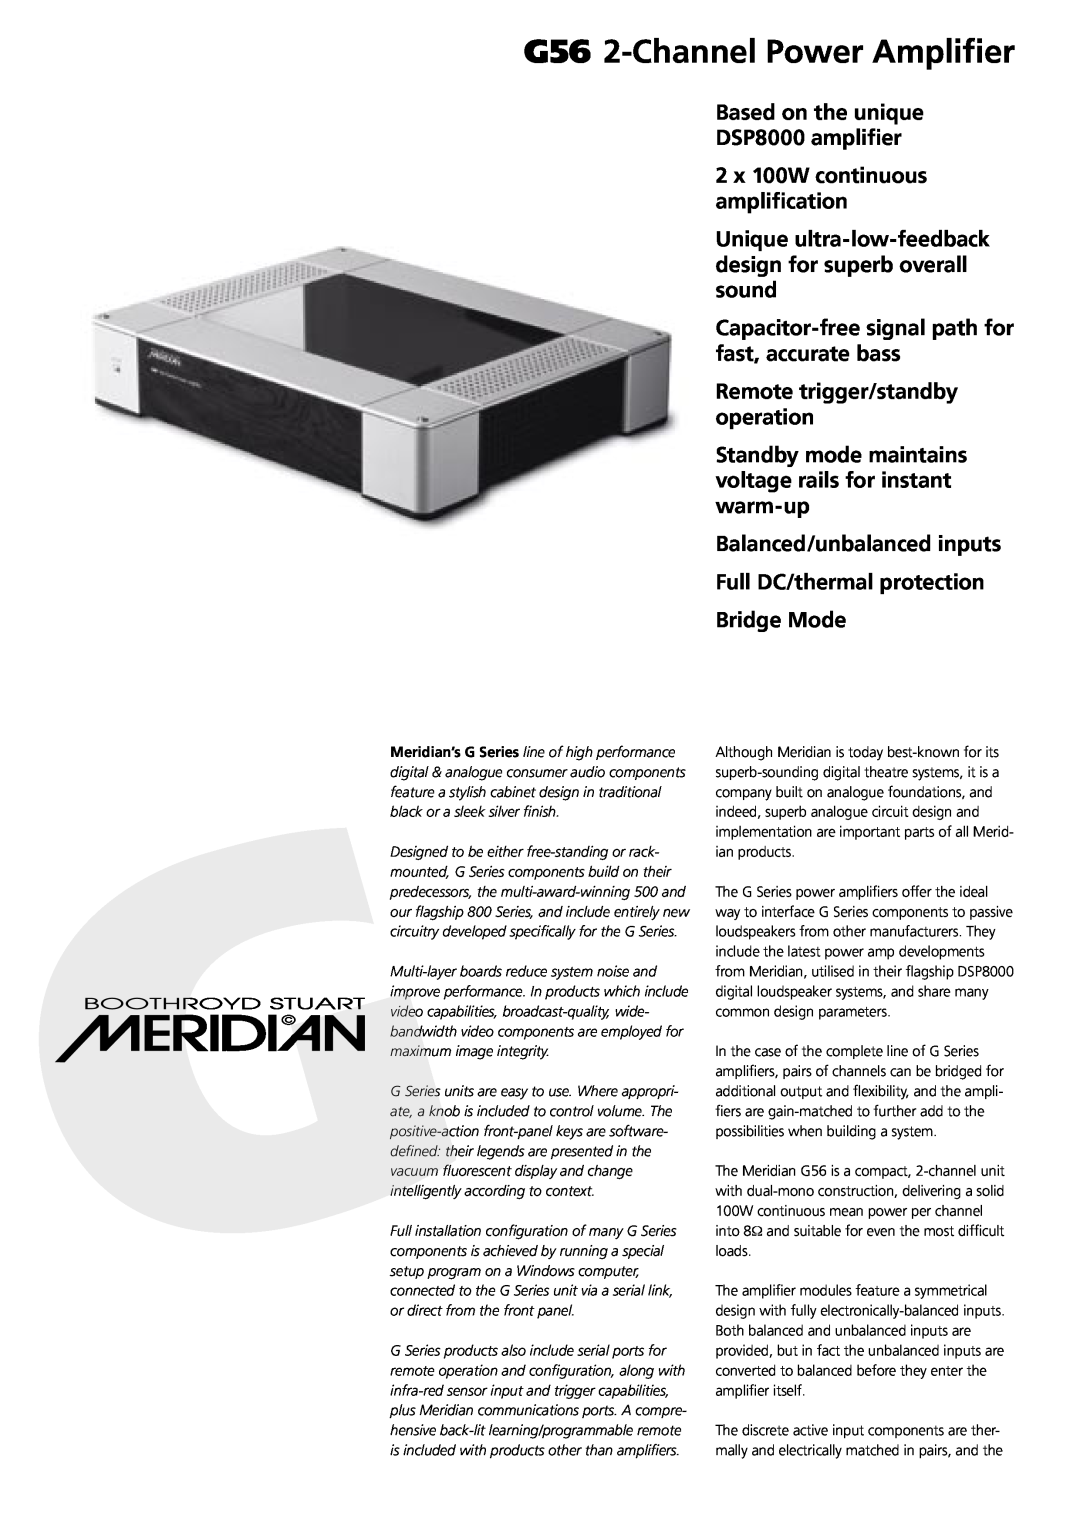 Meridian Audio manual G56 2-ChannelPower Amplifier, Based on the unique DSP8000 amplifier 